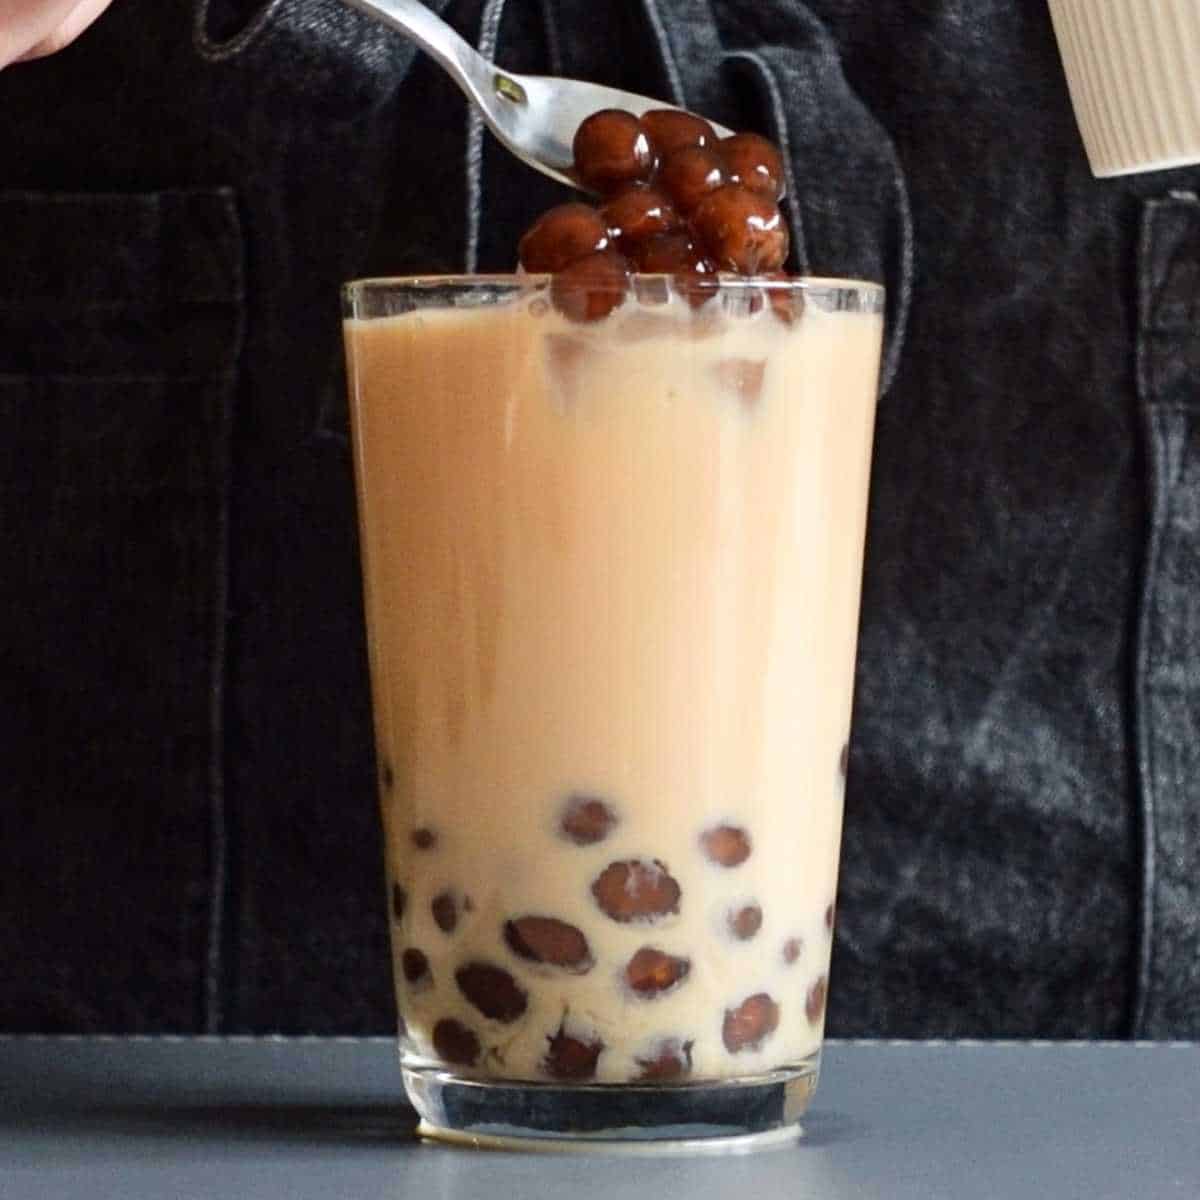 bubble tea shop aesthetic drink recipe at home